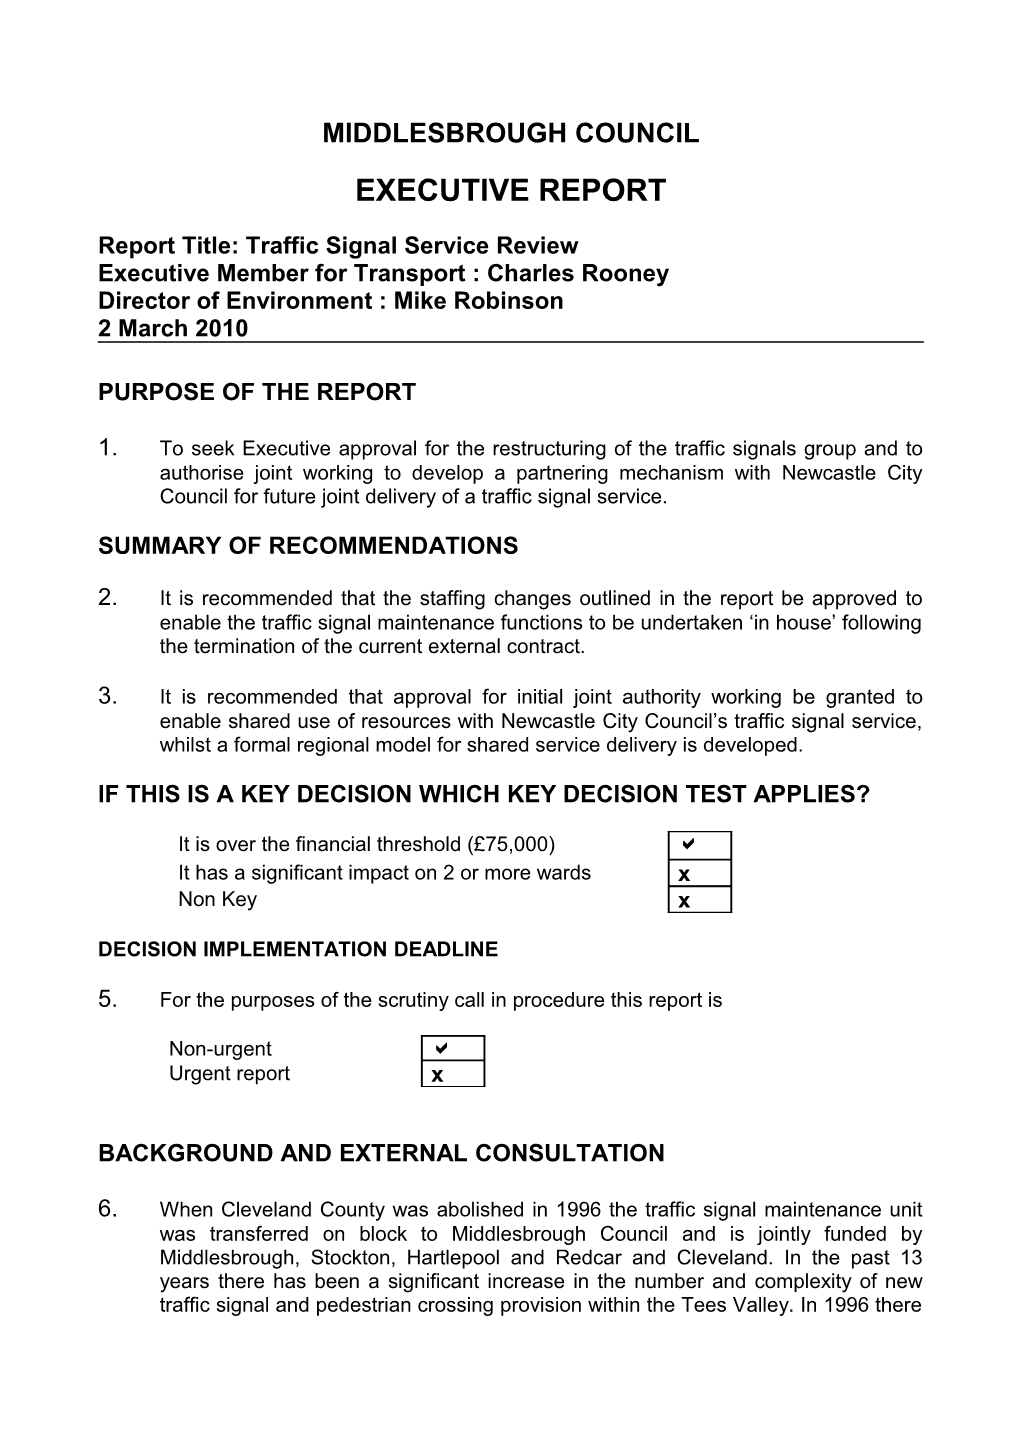 Report Title: Traffic Signal Service Review